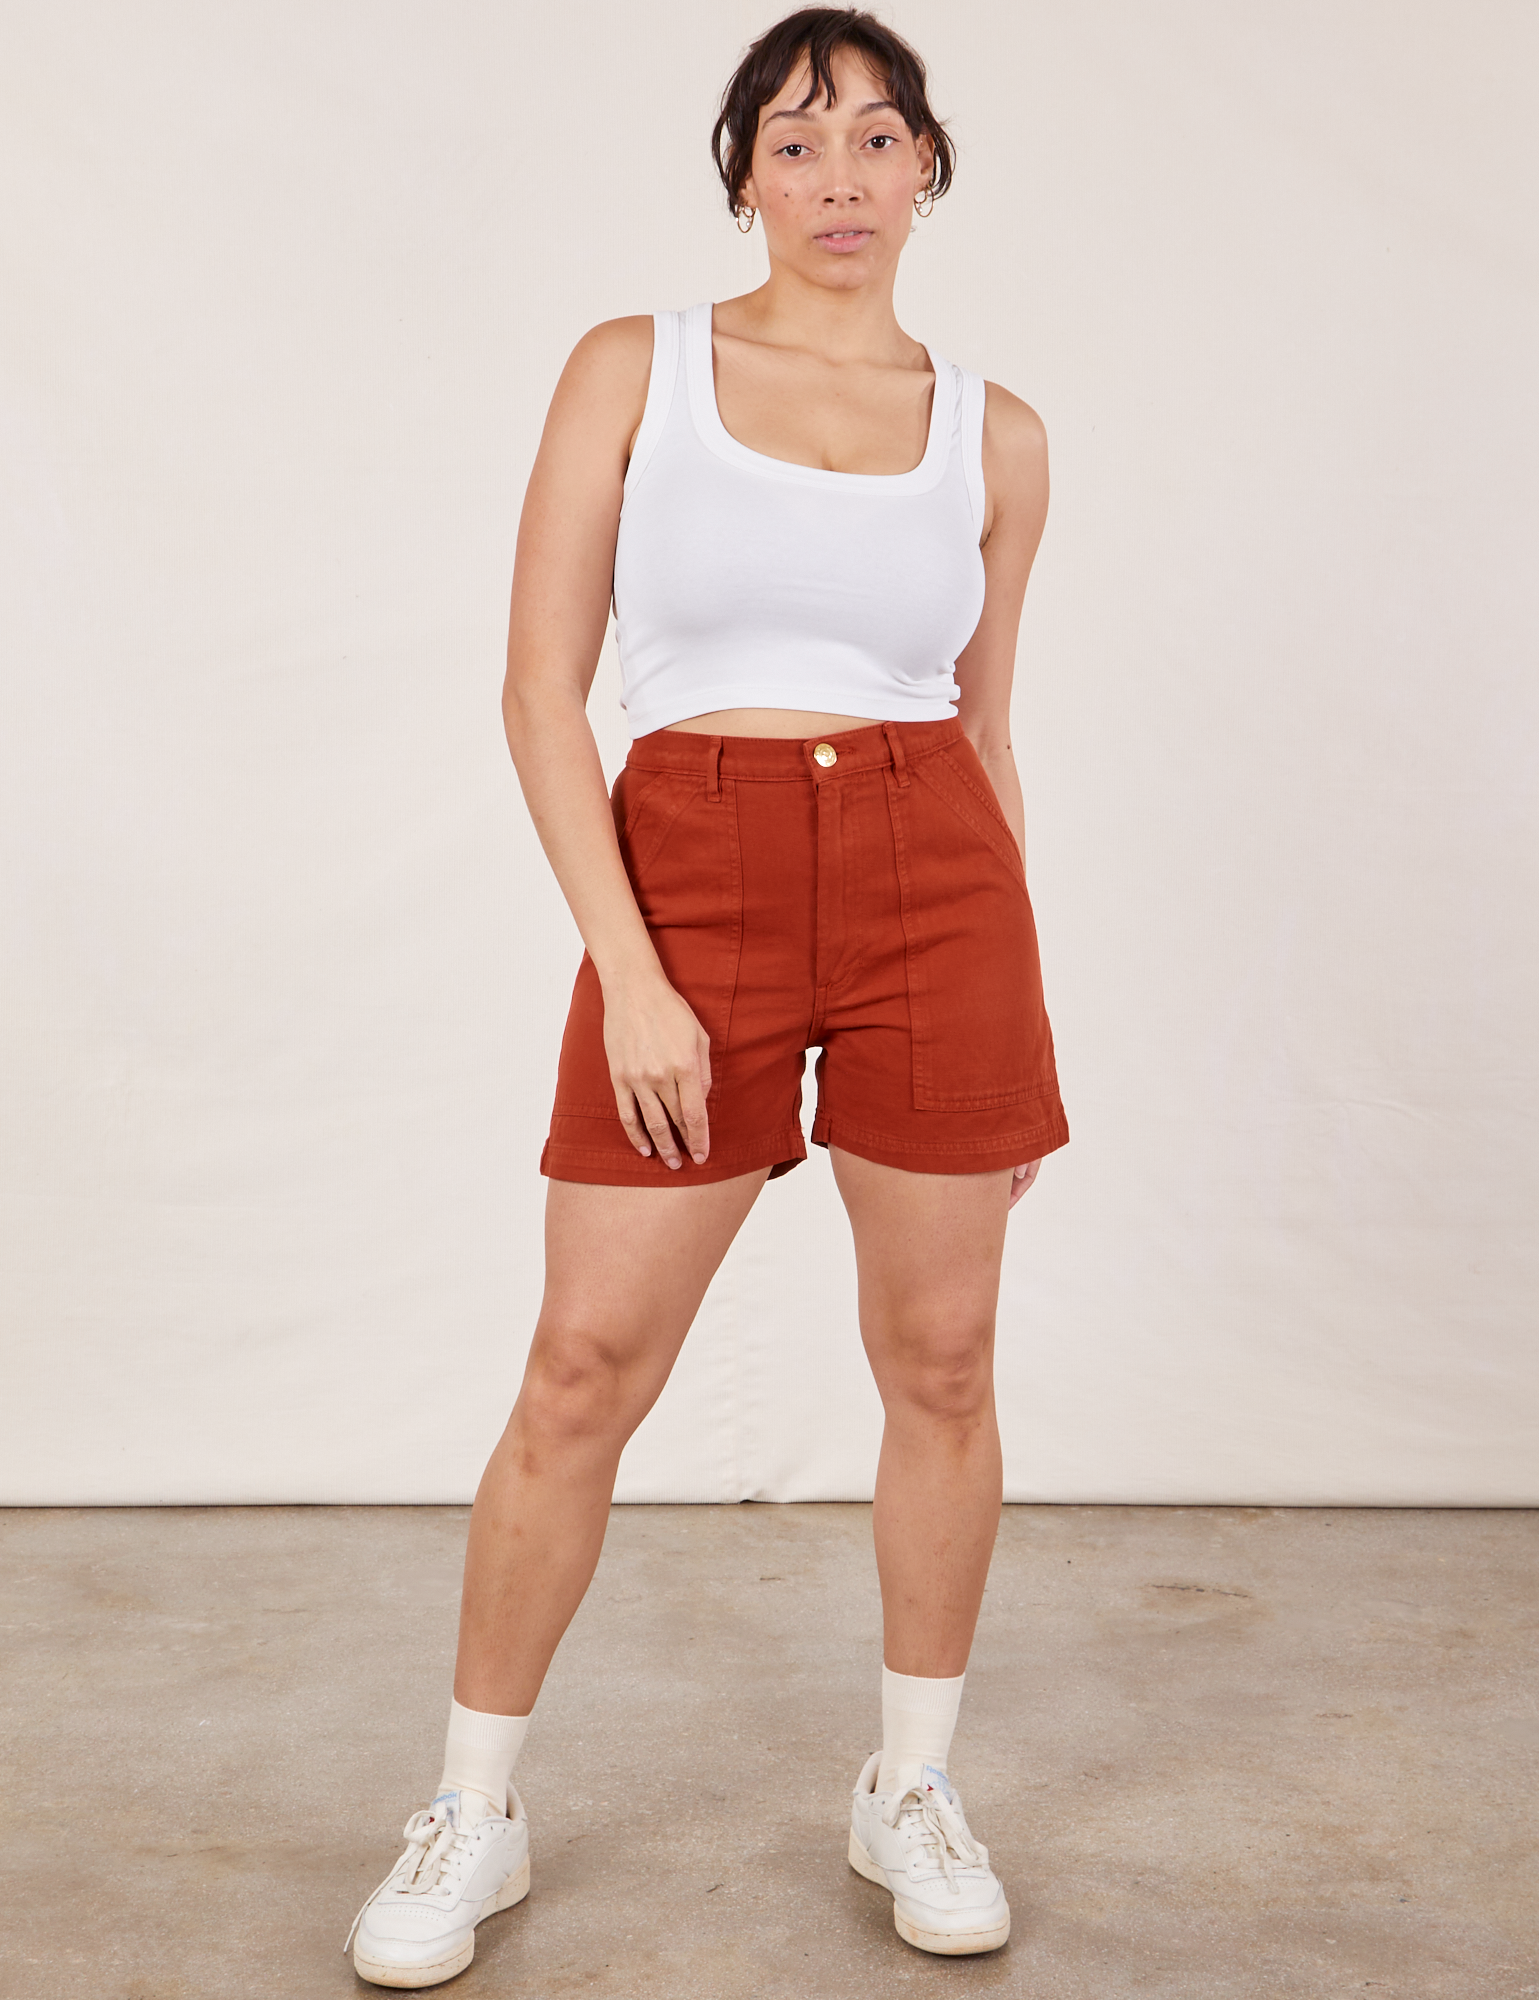 Tiara is 5’4” and wearing S Classic Work Shorts in Paprika paired with Cropped Tank Top in vintage tee off-white